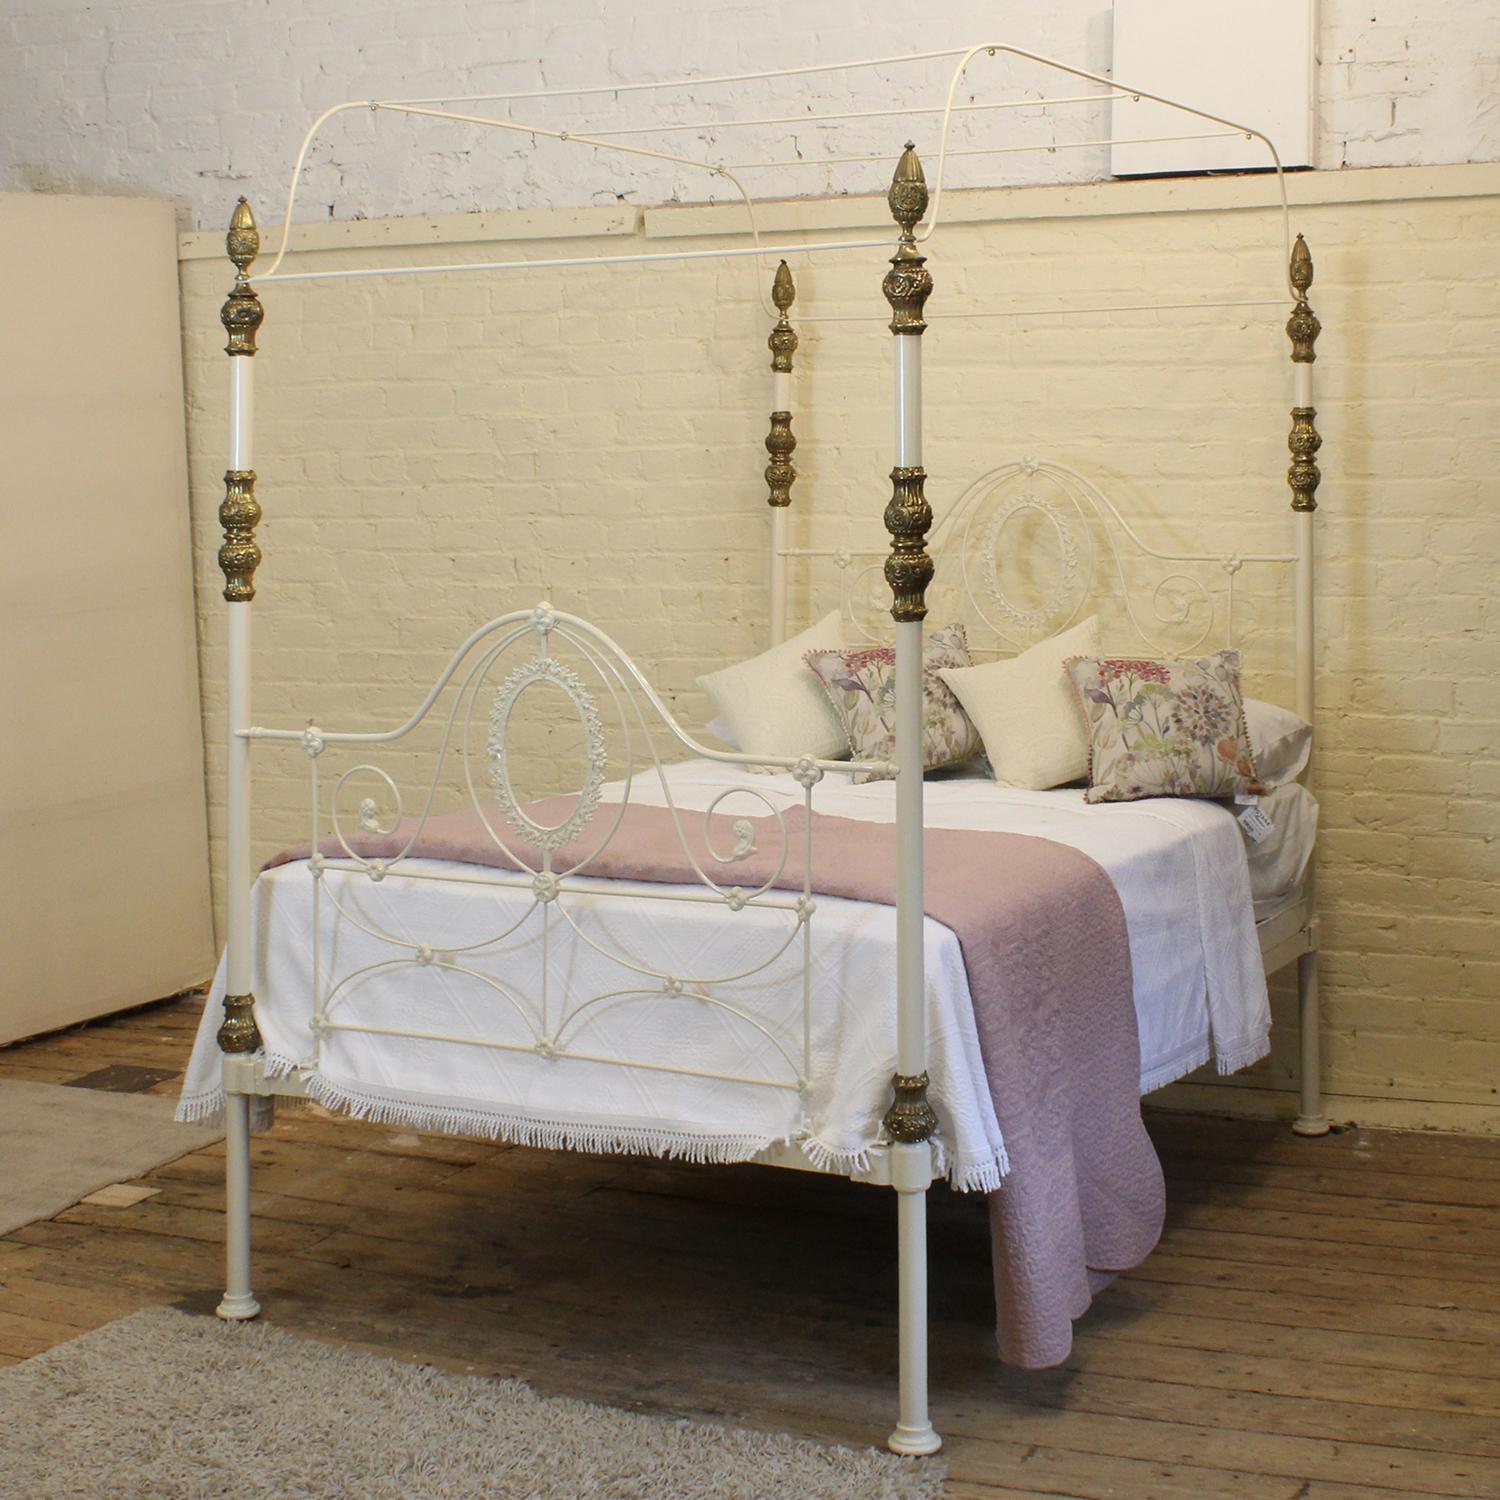 A 5ft wide cast iron antique four poster bed in cream with ornate castings and original brass decoration. The arch canopy can be replaced with a straight one if you wish, or even removed completely to create a tall post bed. Please enquire for